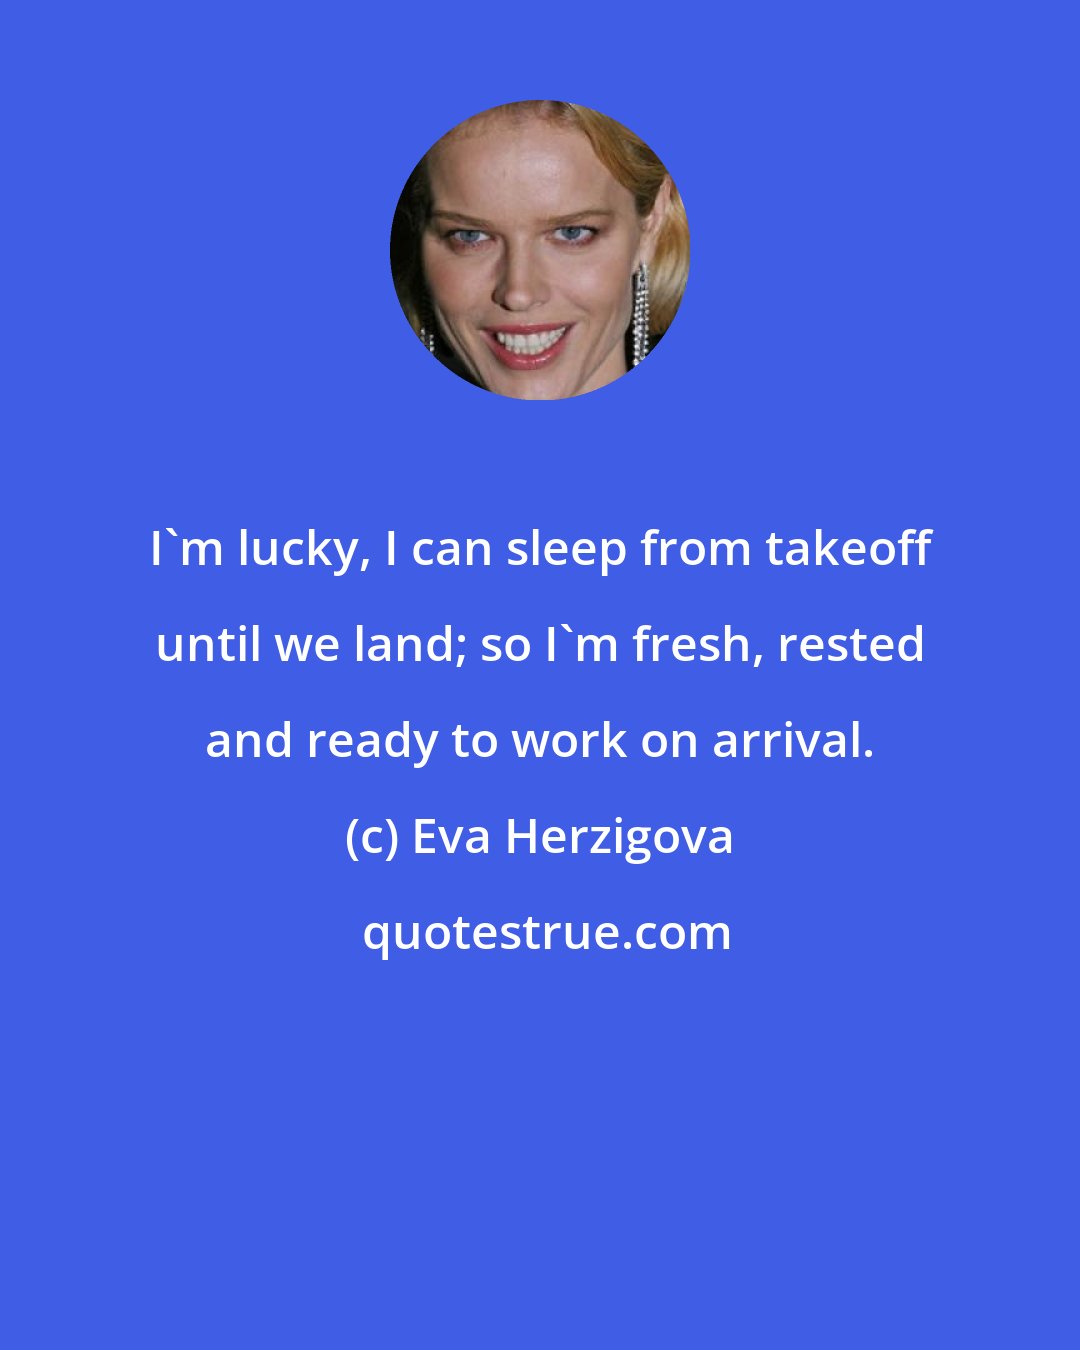 Eva Herzigova: I'm lucky, I can sleep from takeoff until we land; so I'm fresh, rested and ready to work on arrival.